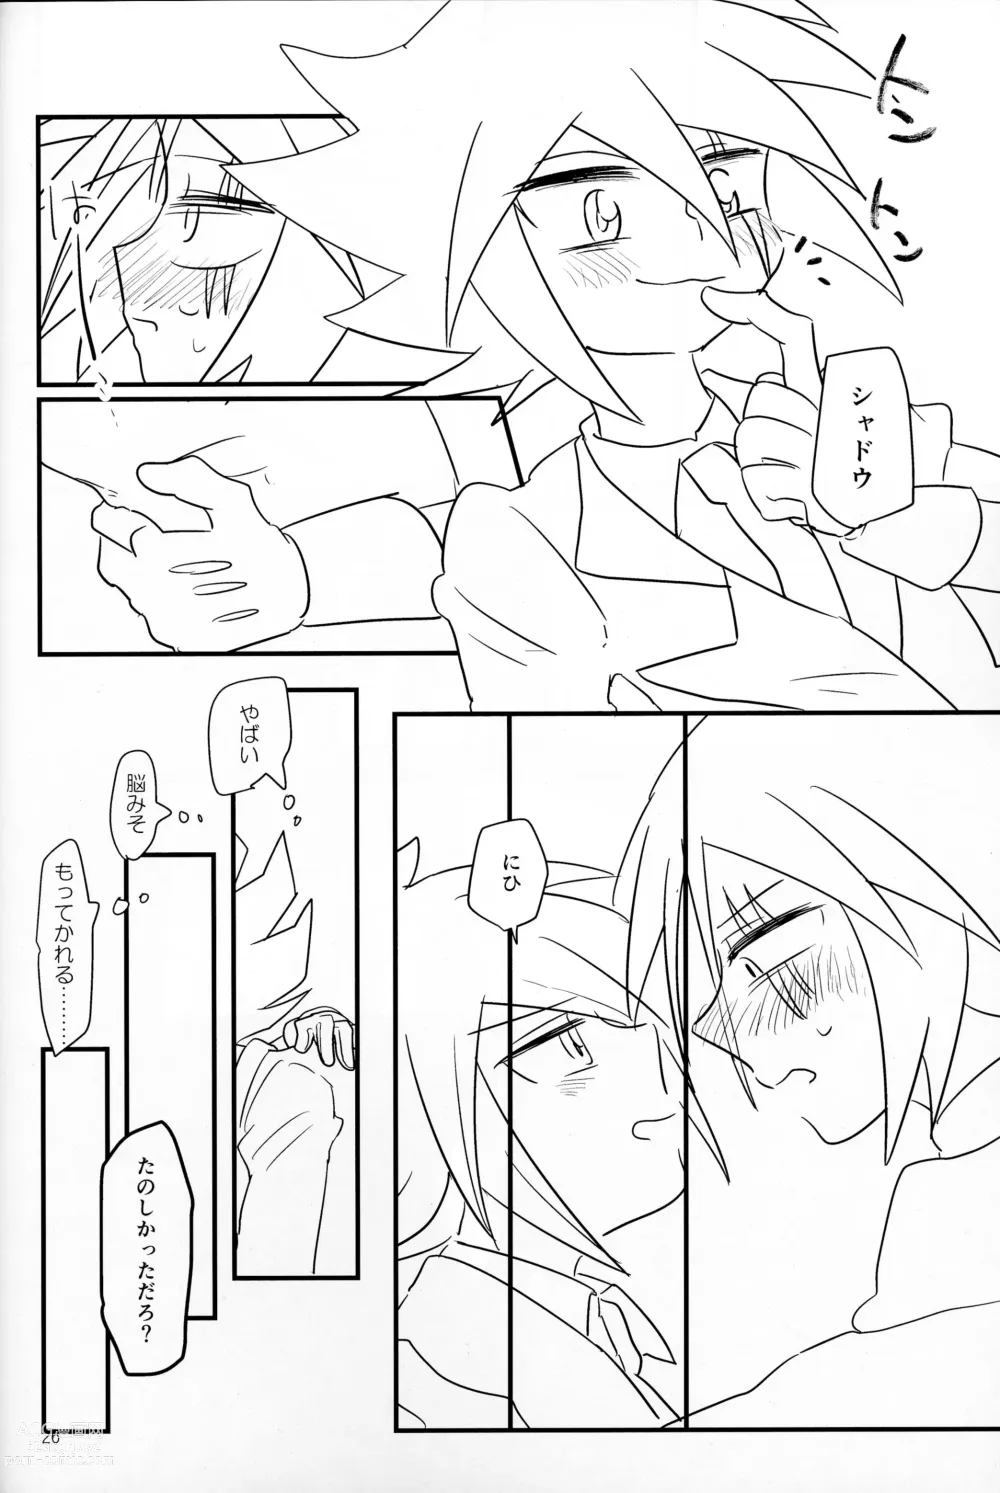 Page 23 of doujinshi IT IS FAIL!